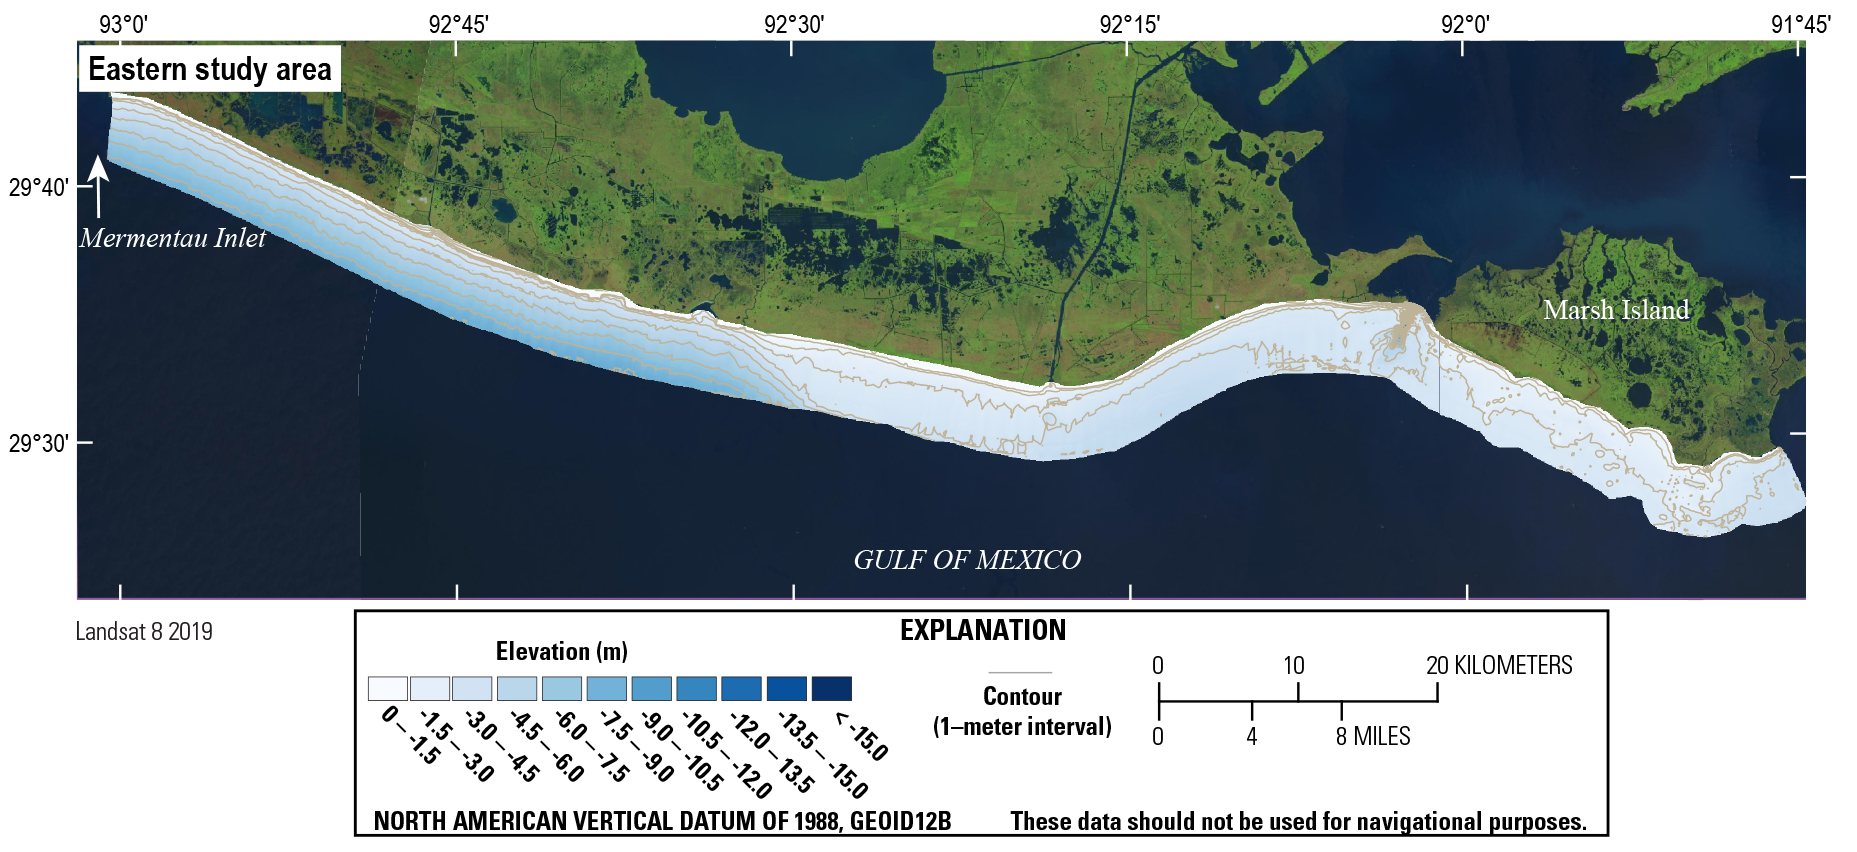 Figure 18. Labels are on the map for Mermentau Inlet, Marsh Island, and the Gulf of
                     Mexico.